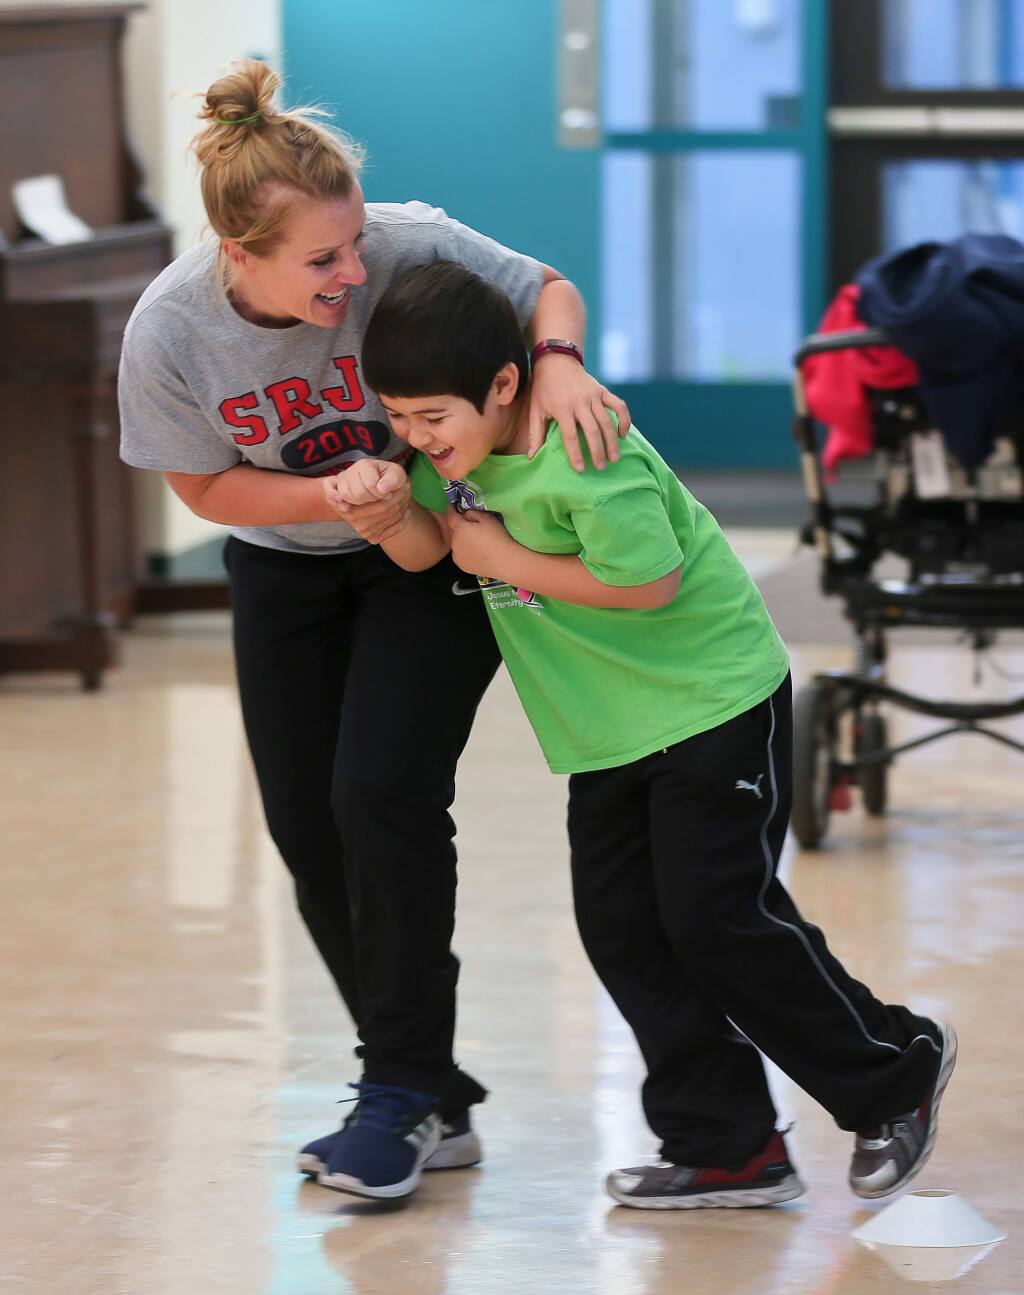 Education specialist Katya Robinson, left, plays with one of her former students, Jaxon Ono, during a physical education class at Park Side Elementary School in Sebastopol on Friday, October 11, 2019. (Christopher Chung/ The Press Democrat)